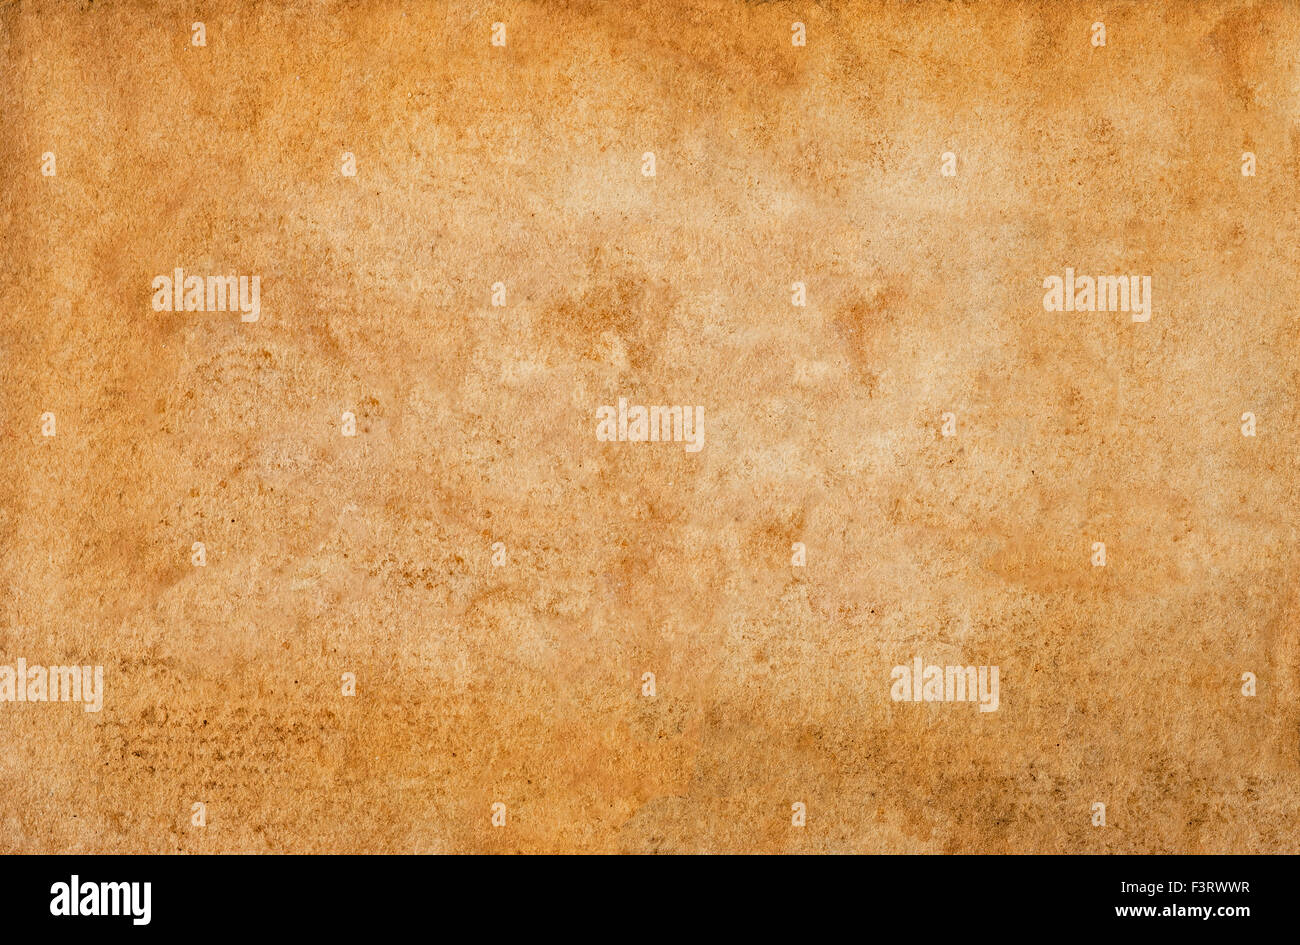 Dirty old  parchment with spots and stripes Stock Photo